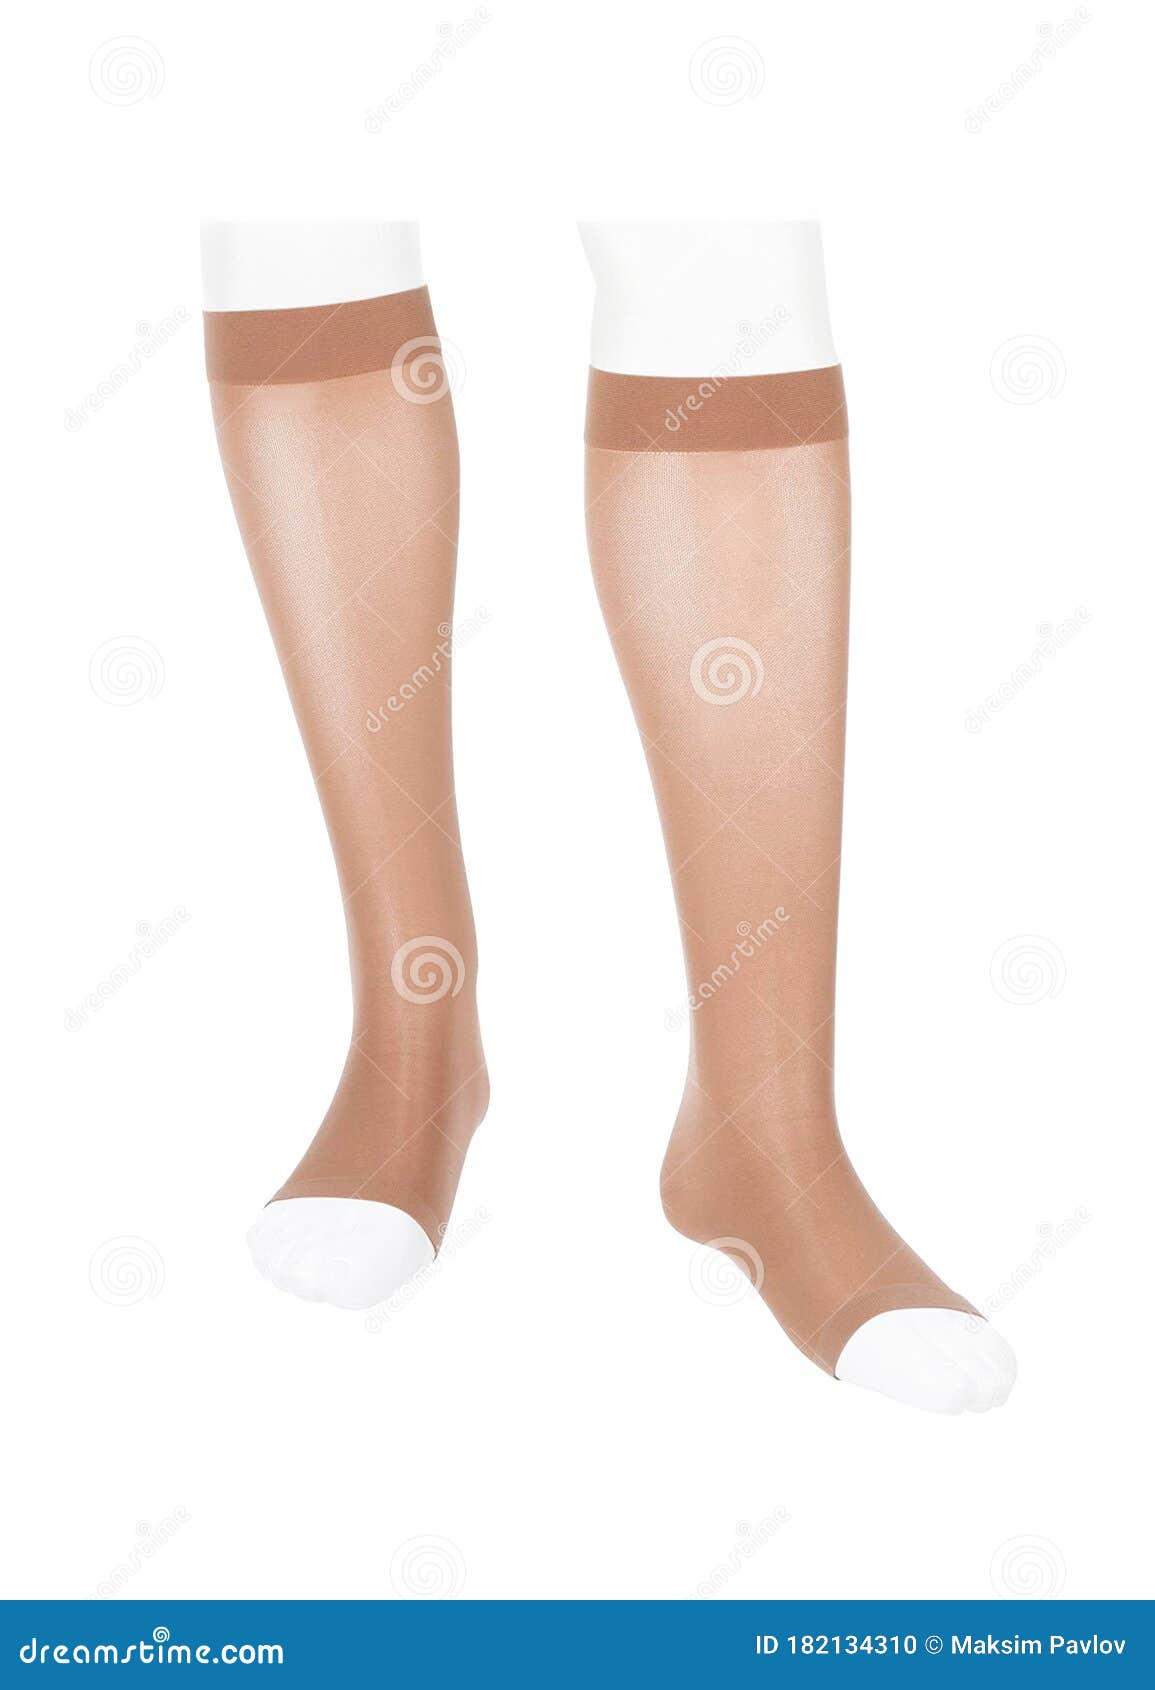 Medical Compression Stockings for Varicose Veins and Venouse Therapy.  Compression Hosiery Stock Illustration - Illustration of high, hosiery:  182134310